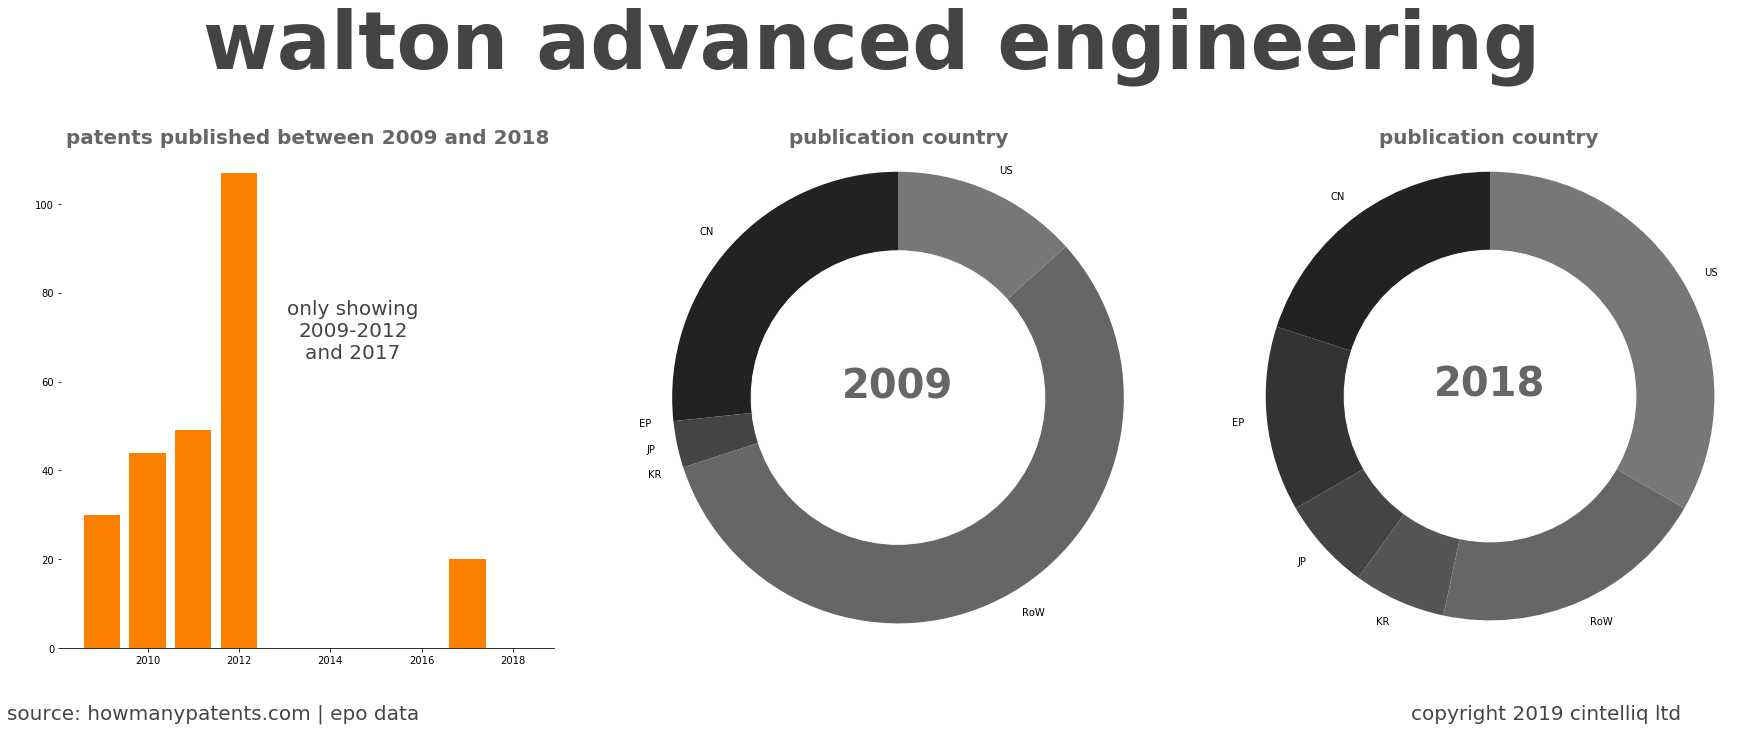 summary of patents for Walton Advanced Engineering